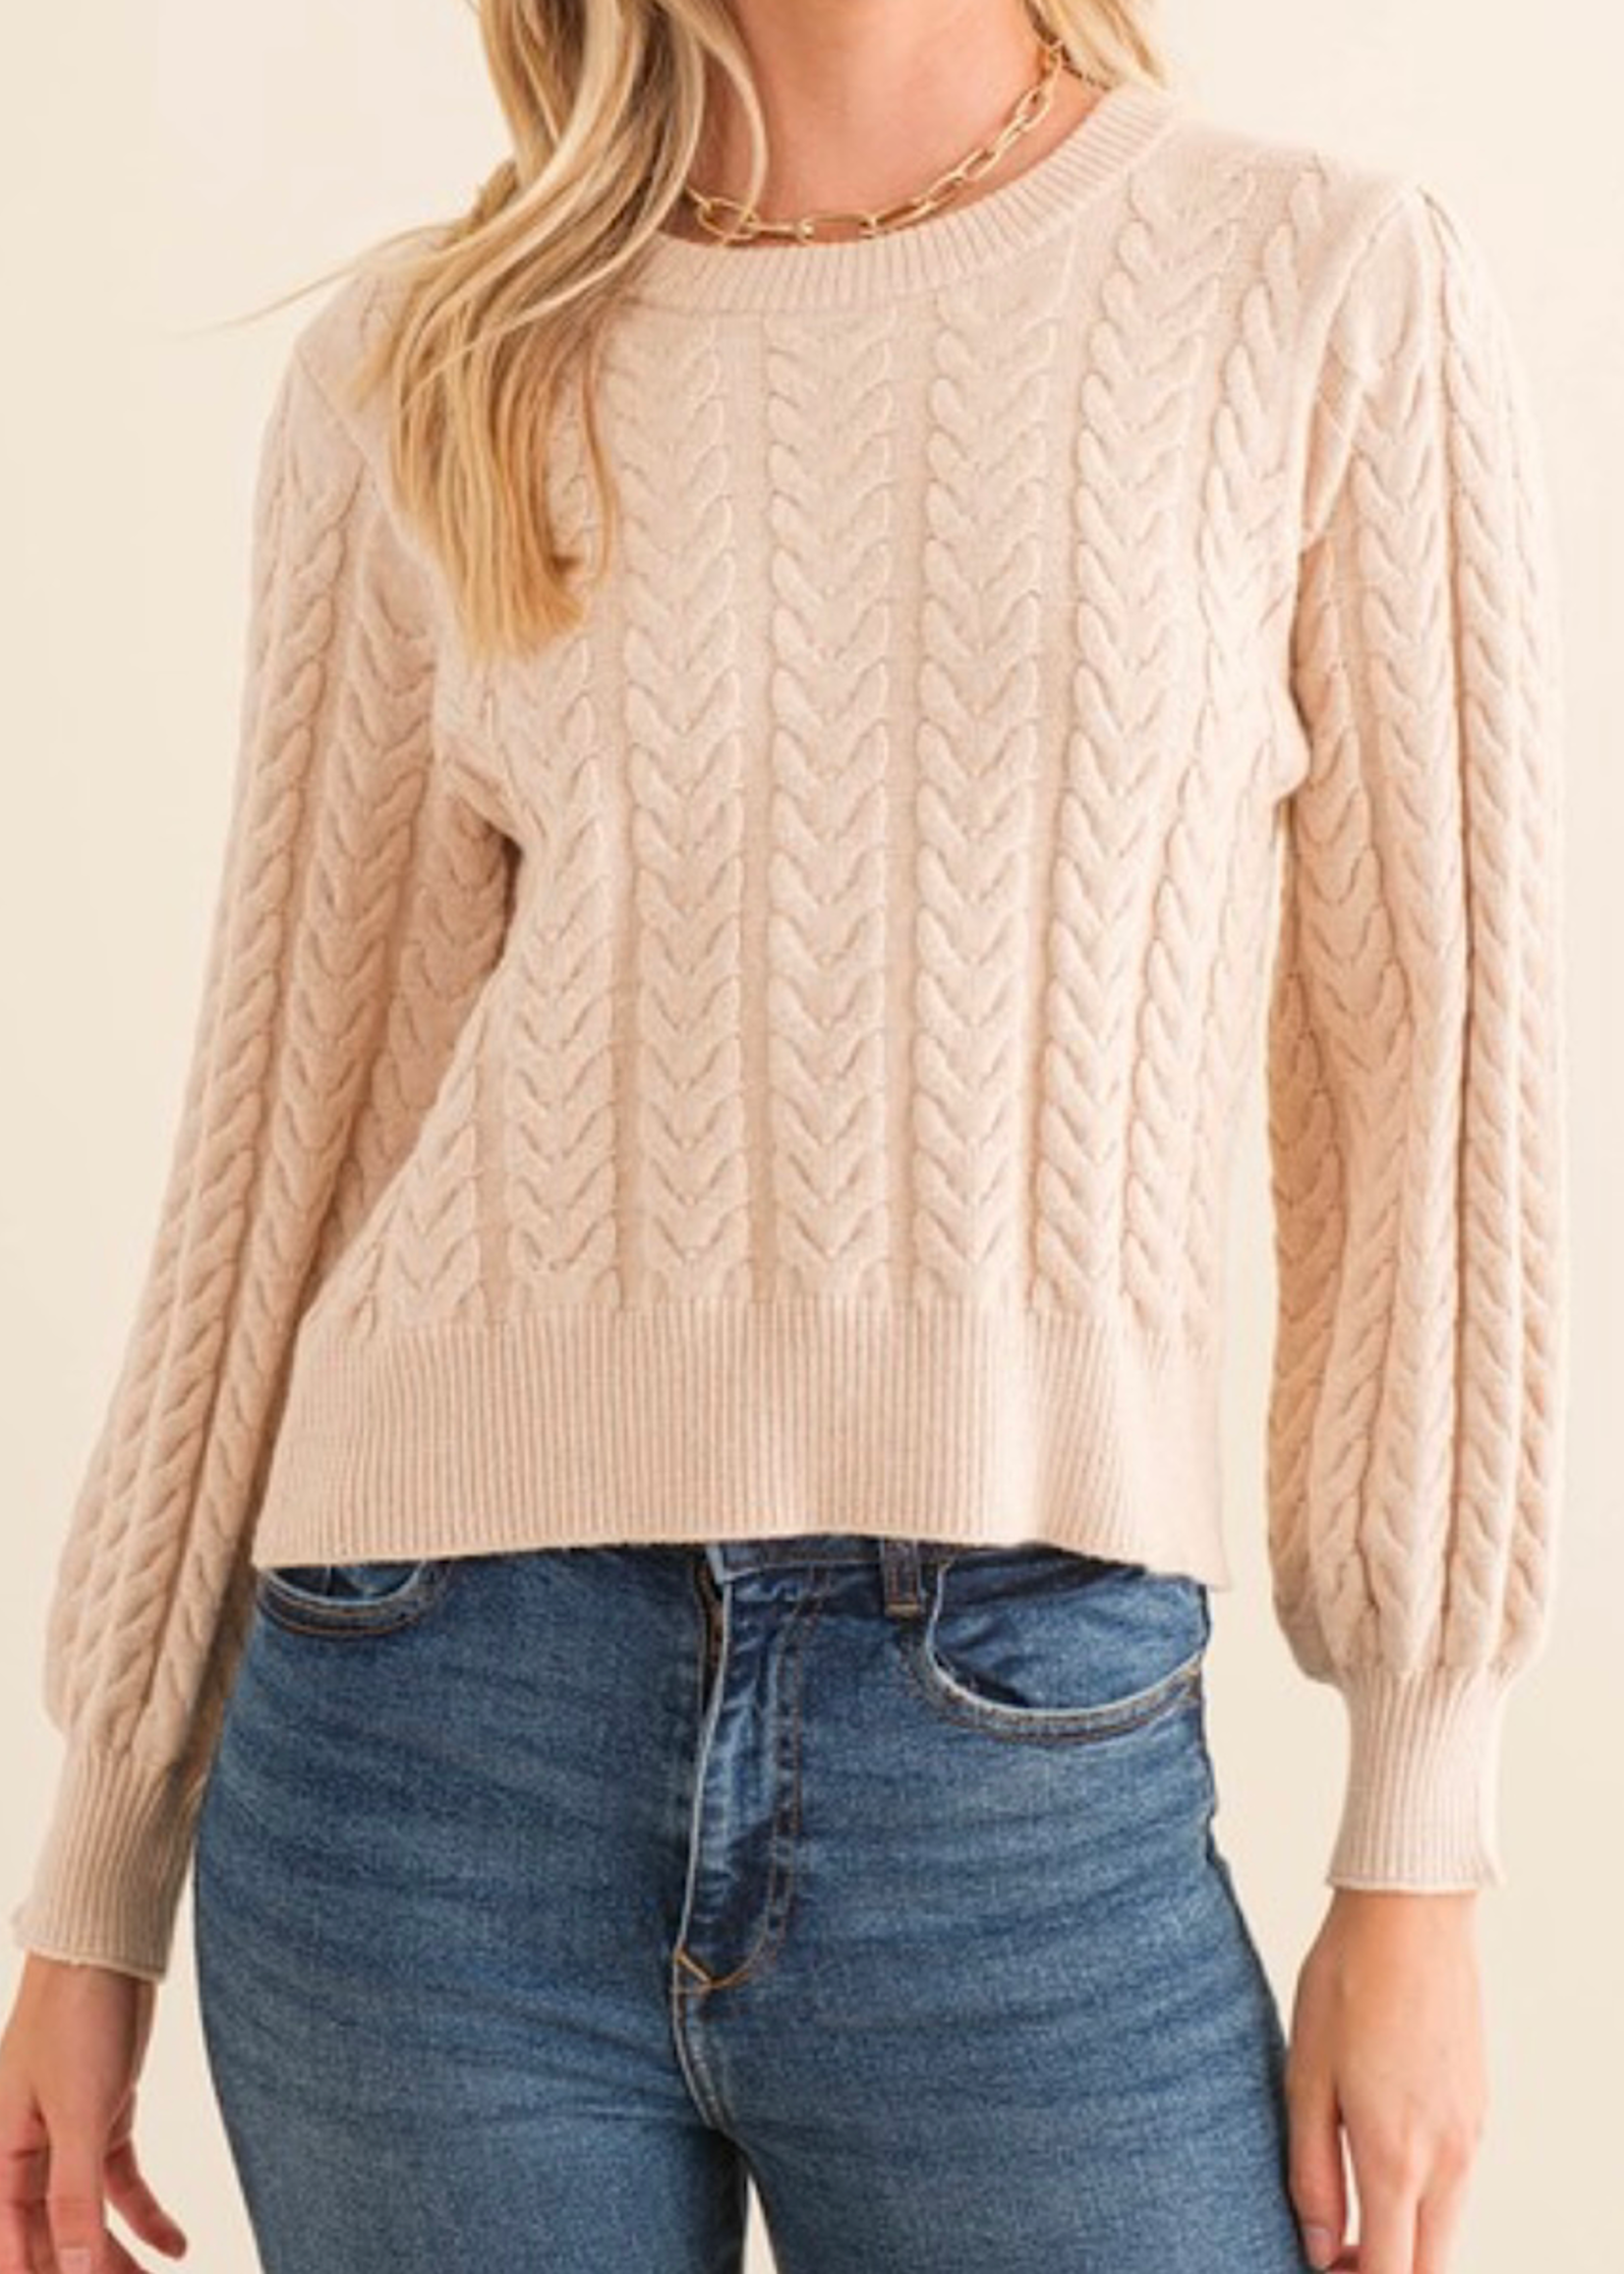 Oatmeal Soft Cable Knit Sweater